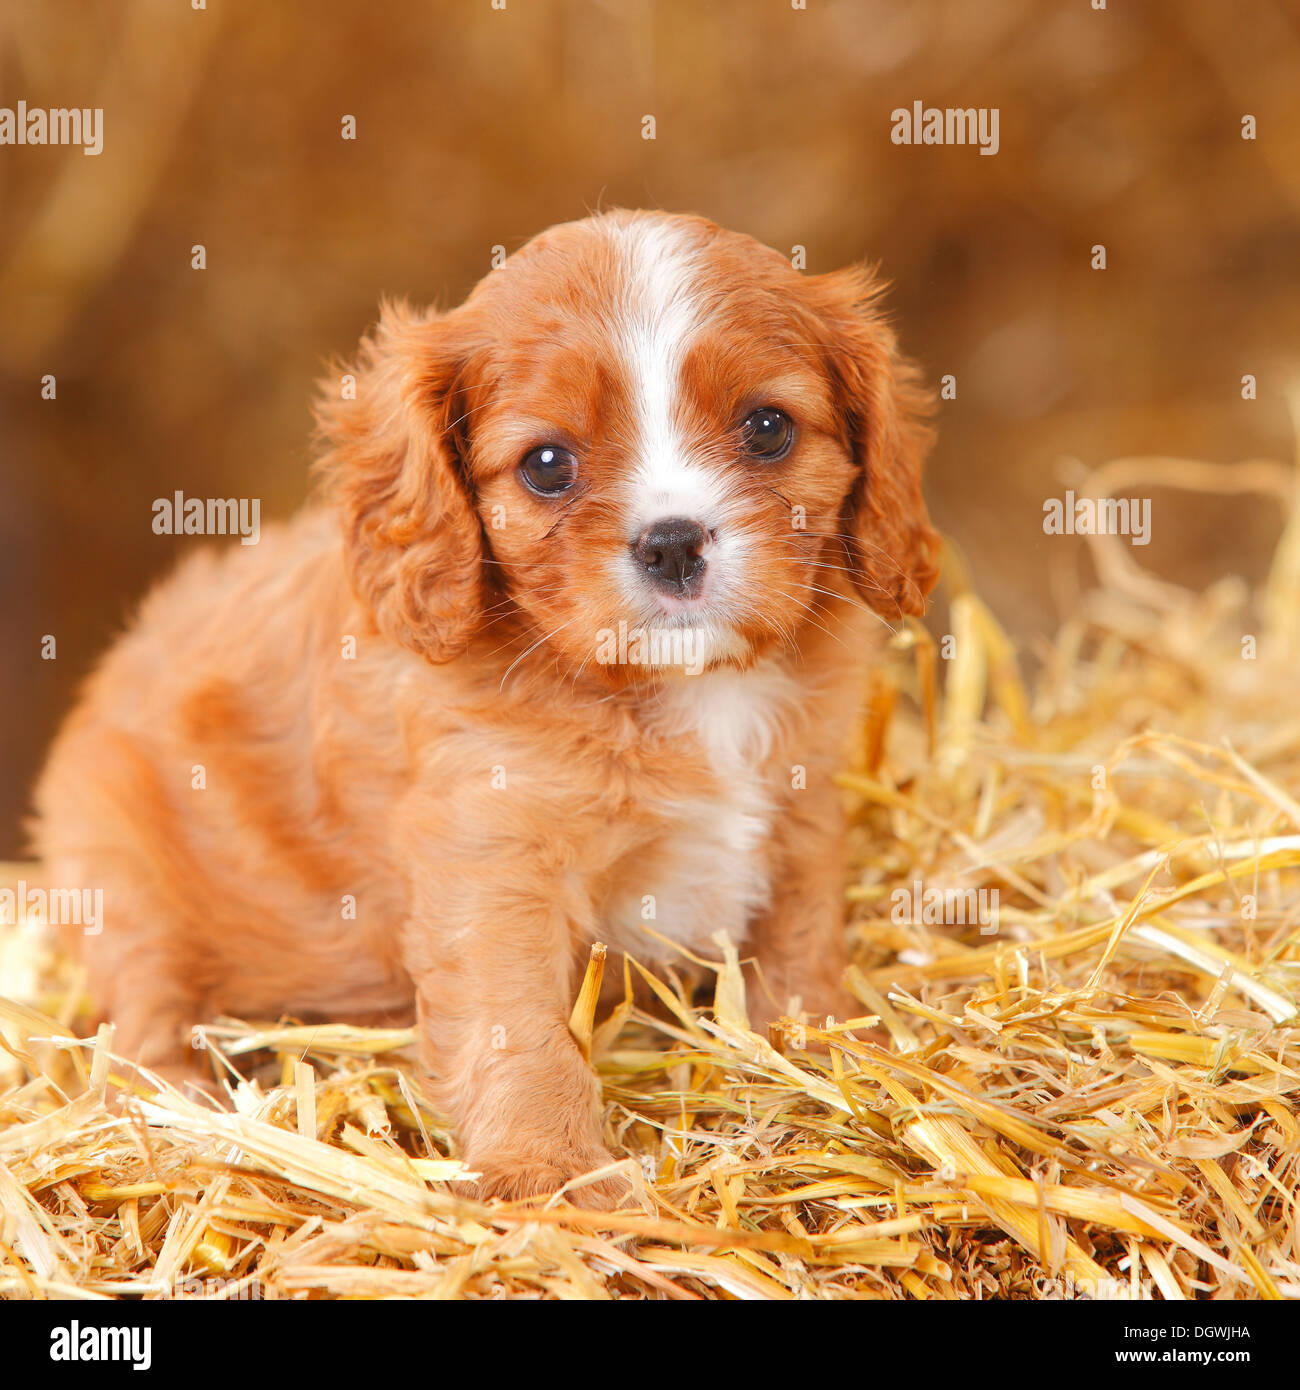 Top 92+ Images what to feed cavalier king charles puppy 6 weeks Updated